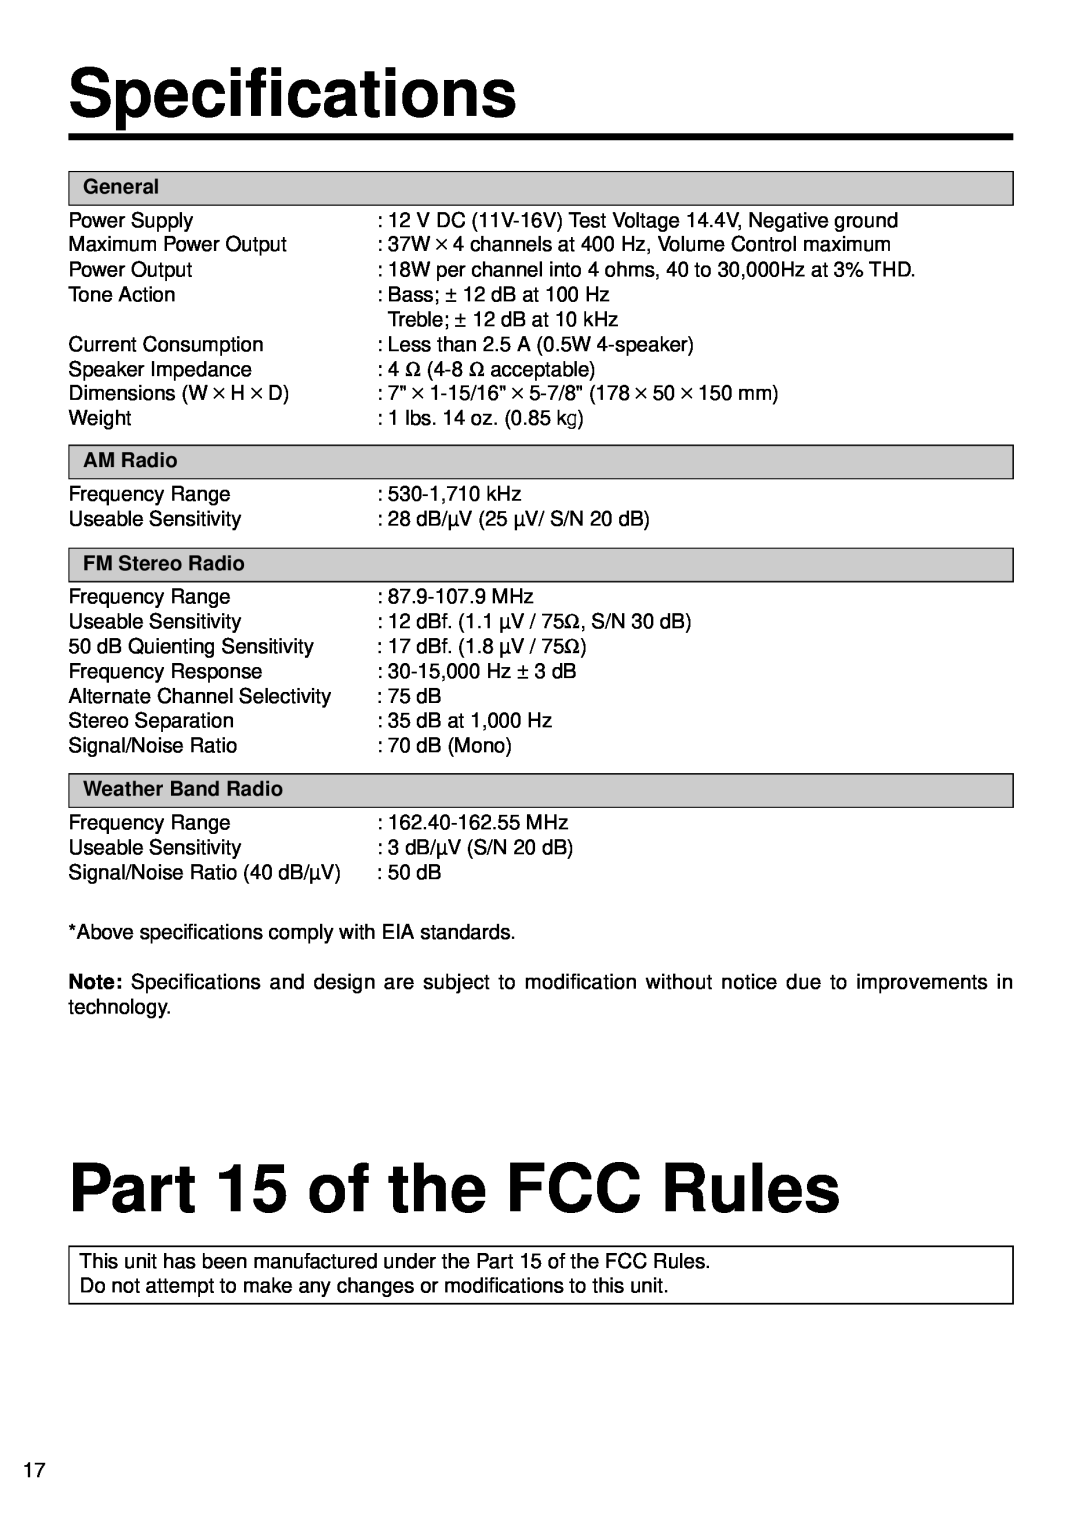 Panasonic CR-W400U Specifications, Part 15 of the FCC Rules, General, AM Radio, FM Stereo Radio, Weather Band Radio 